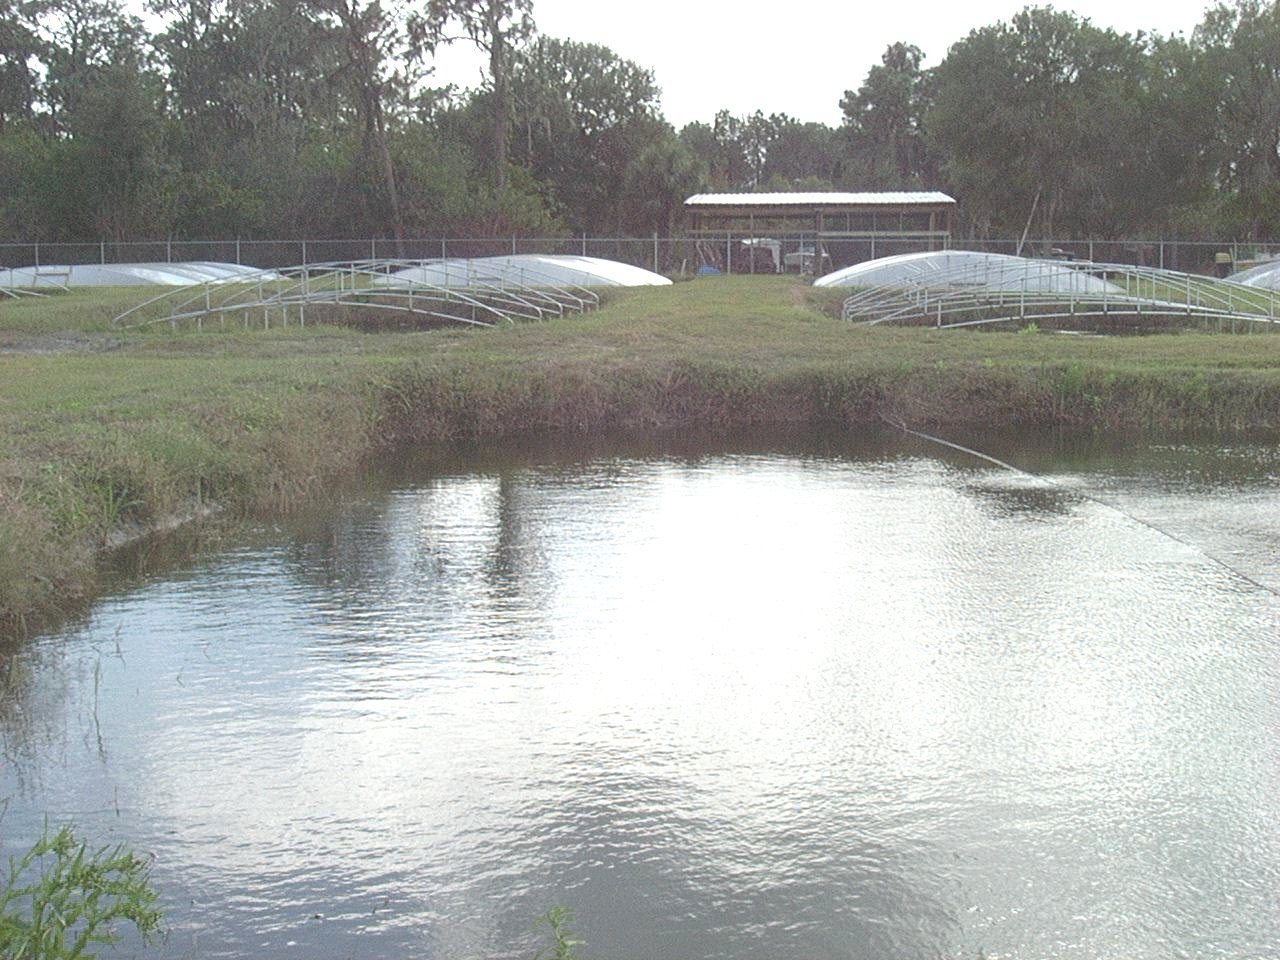 Ponds for fish culture with open framework showing